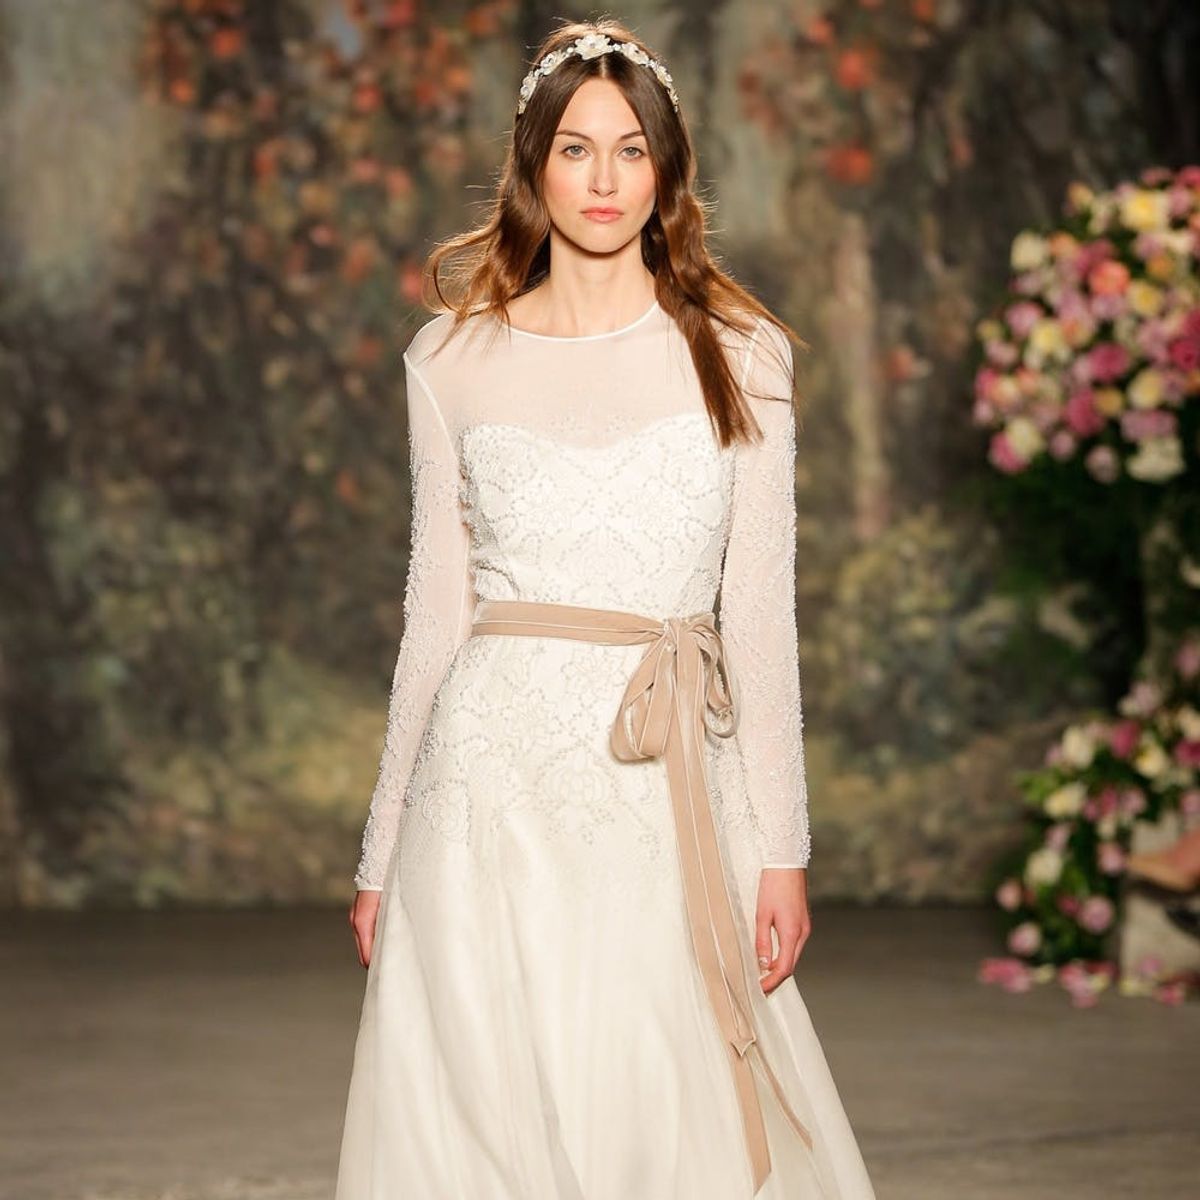 7 New Wedding Dress Trends Every Bride-to-Be Needs to See